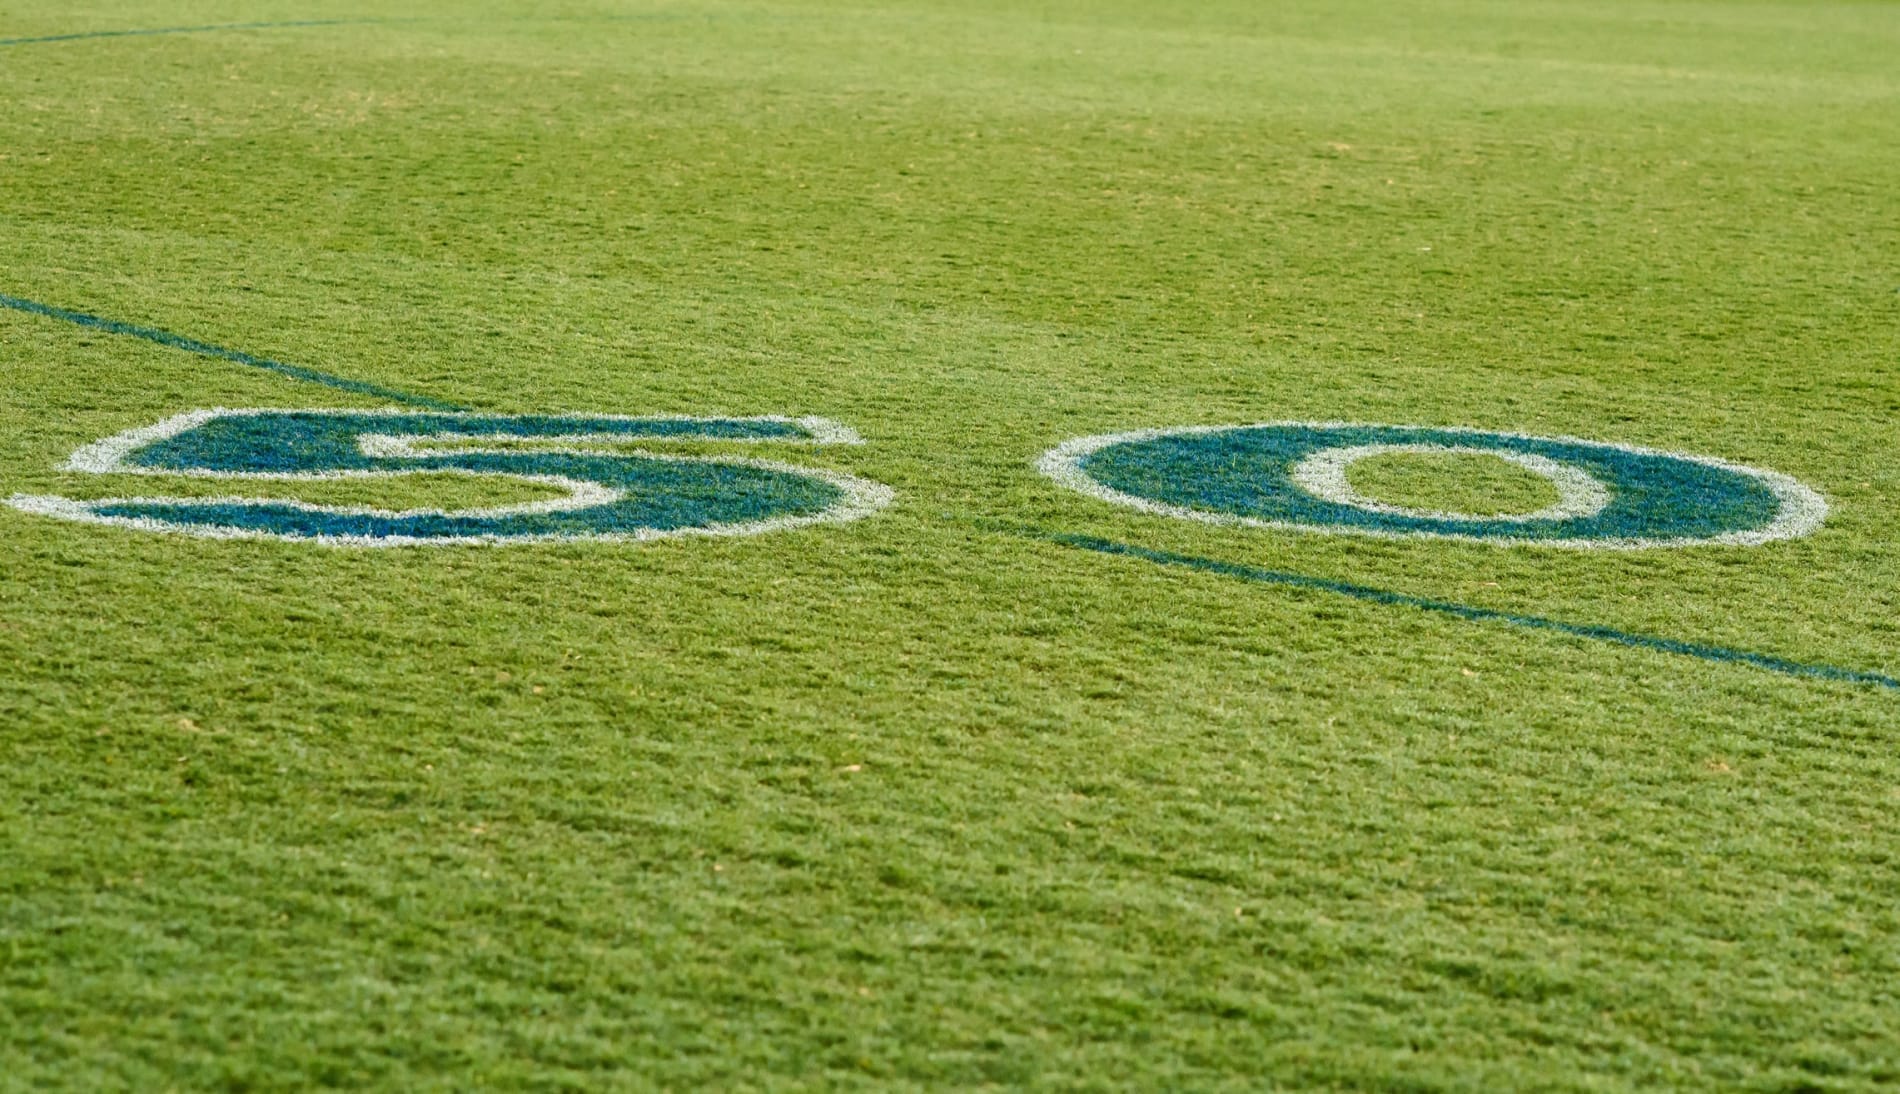 The 50-metre line on an AFL field